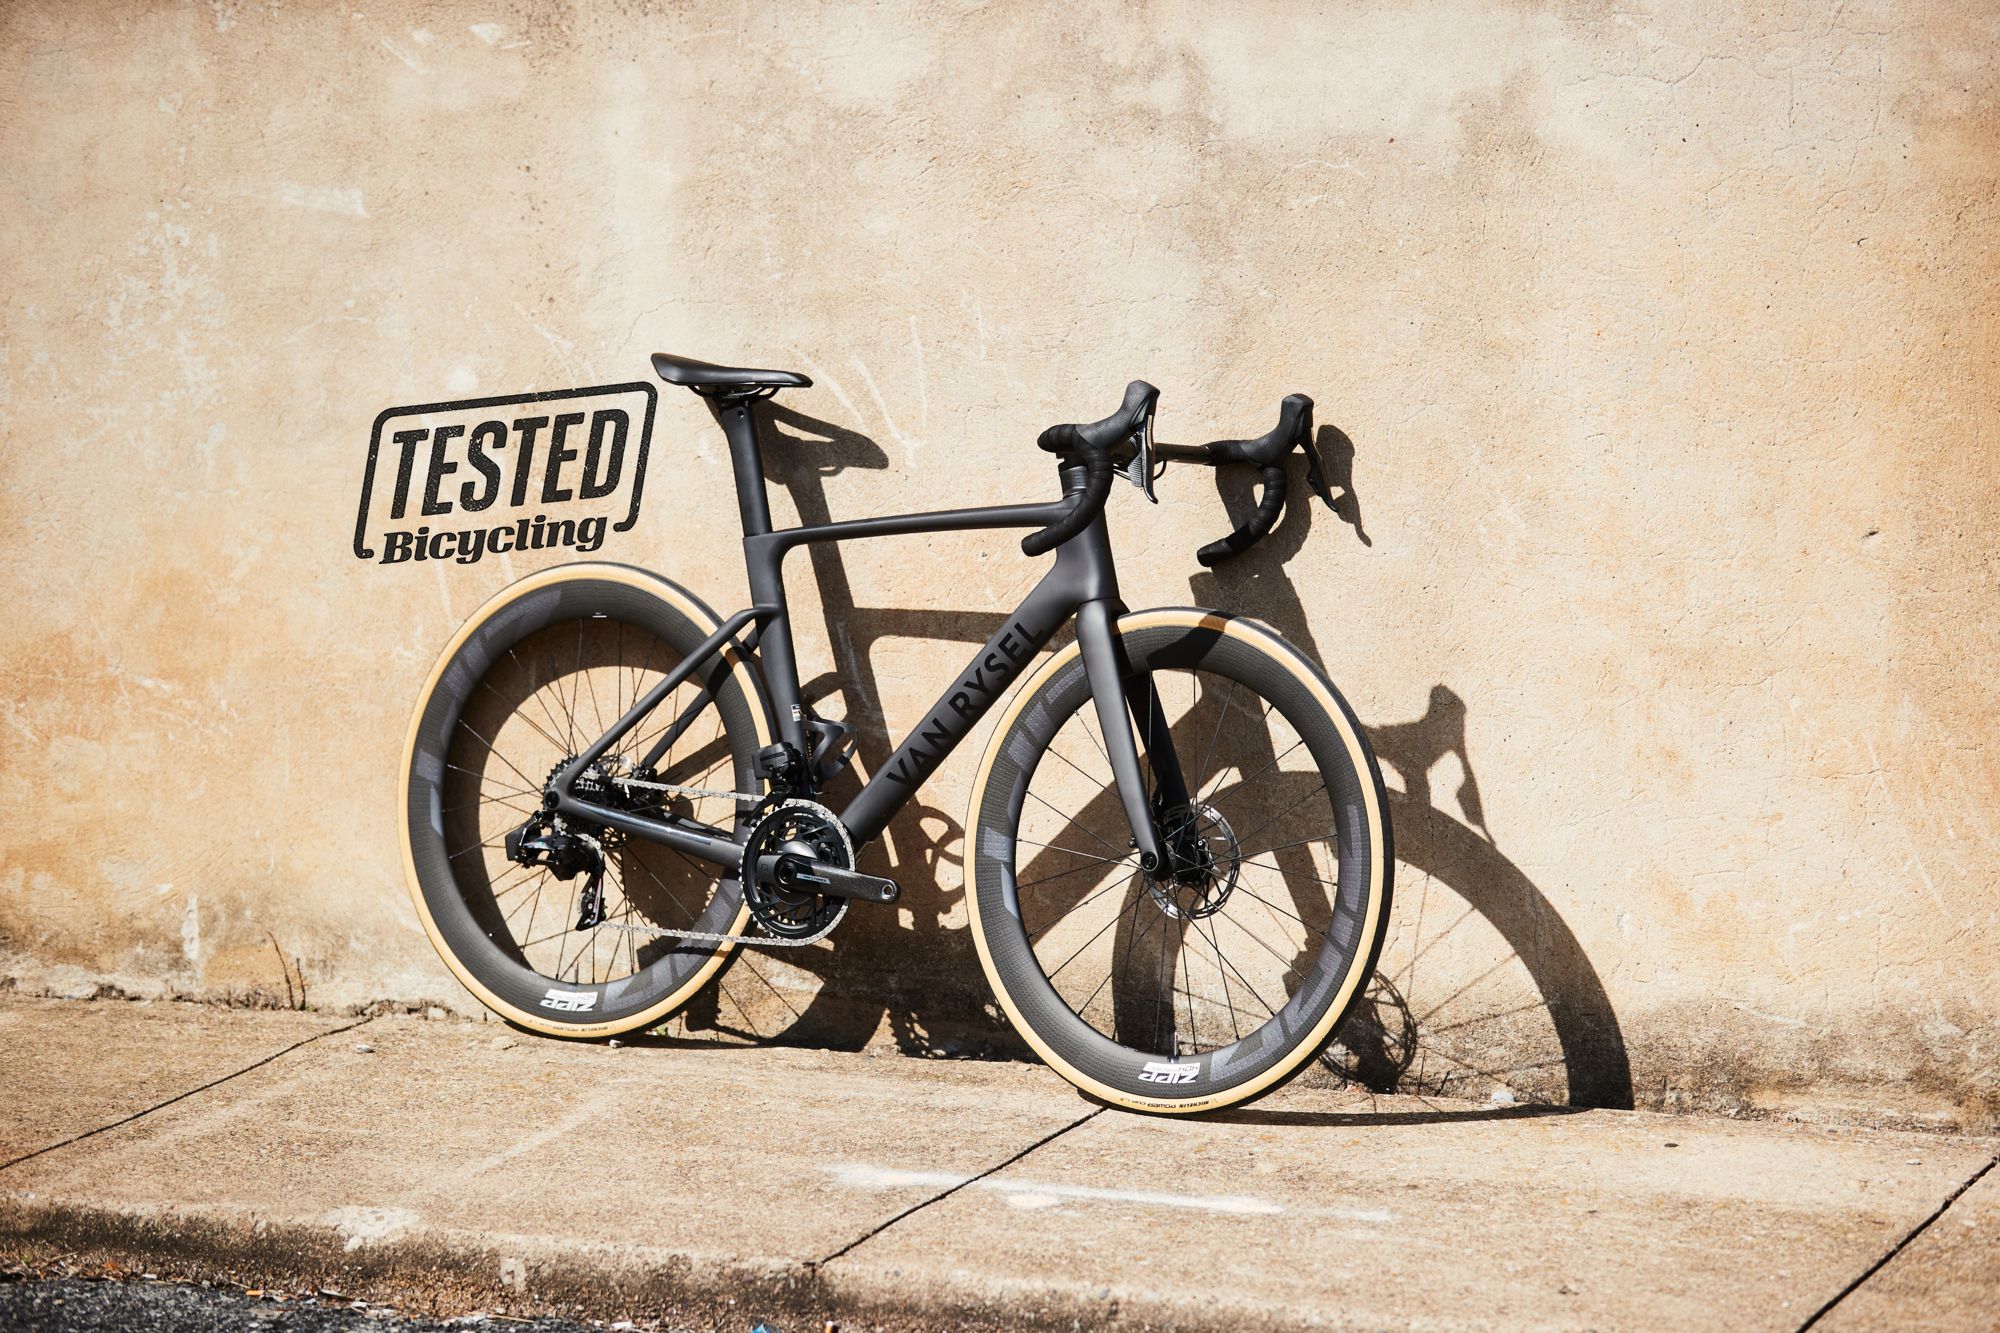 A Van Rysel with a titanium frame, carbon inserts and integrated bags for  ultra-distance